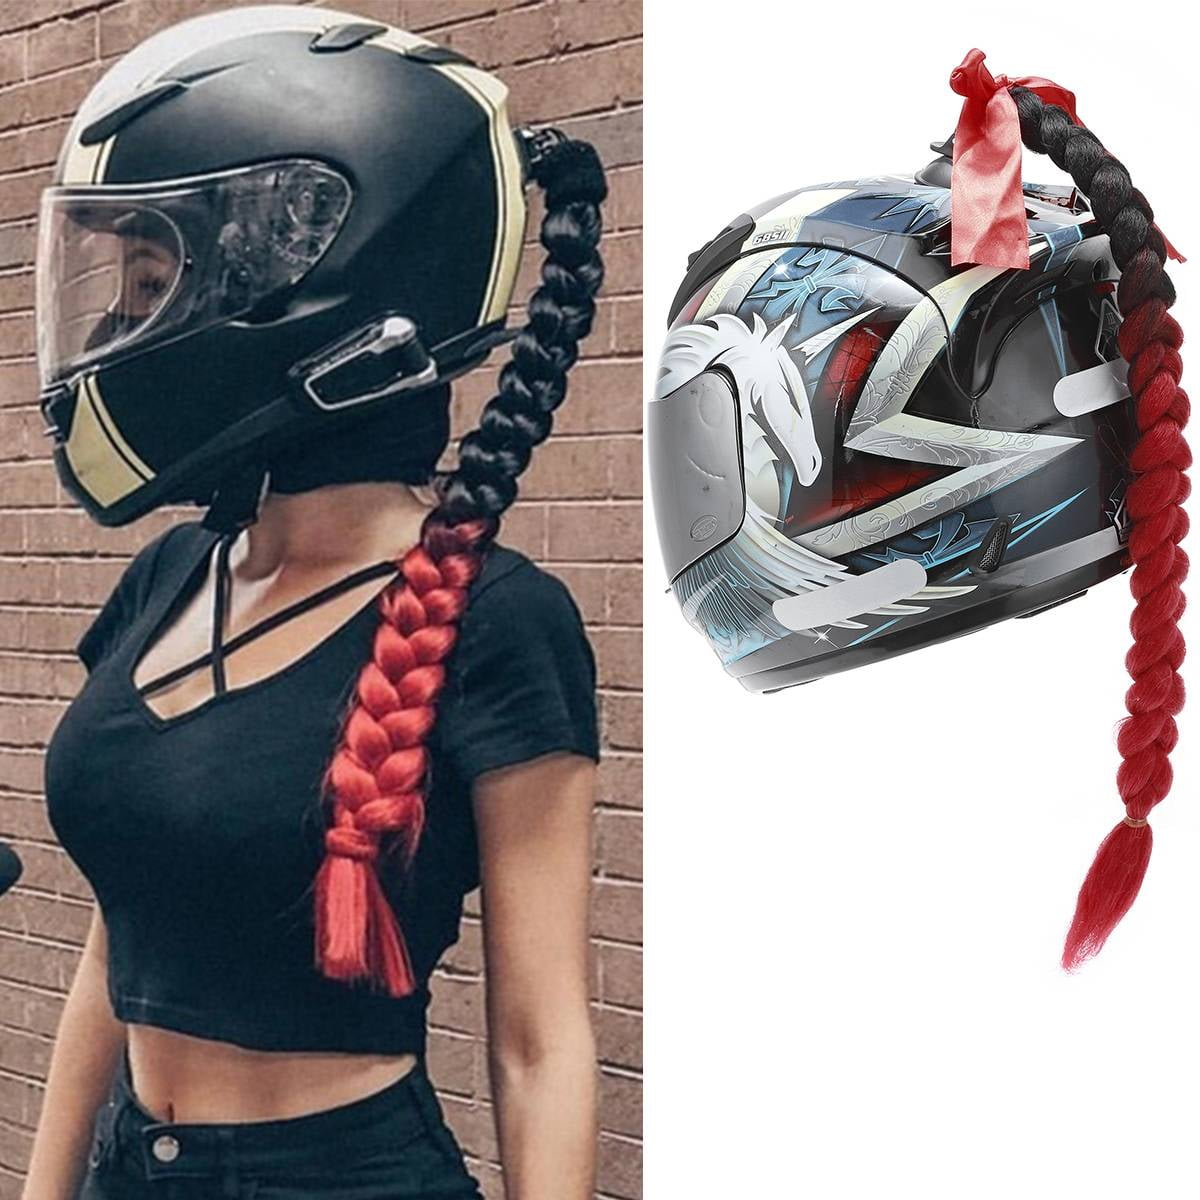 F FIERCE CYCLE Helmet Decor Pigtail Gradient Braid Ponytail Hair with Suction Cup 22.05 for Motorcycle Scooter Helmet Pink Blue